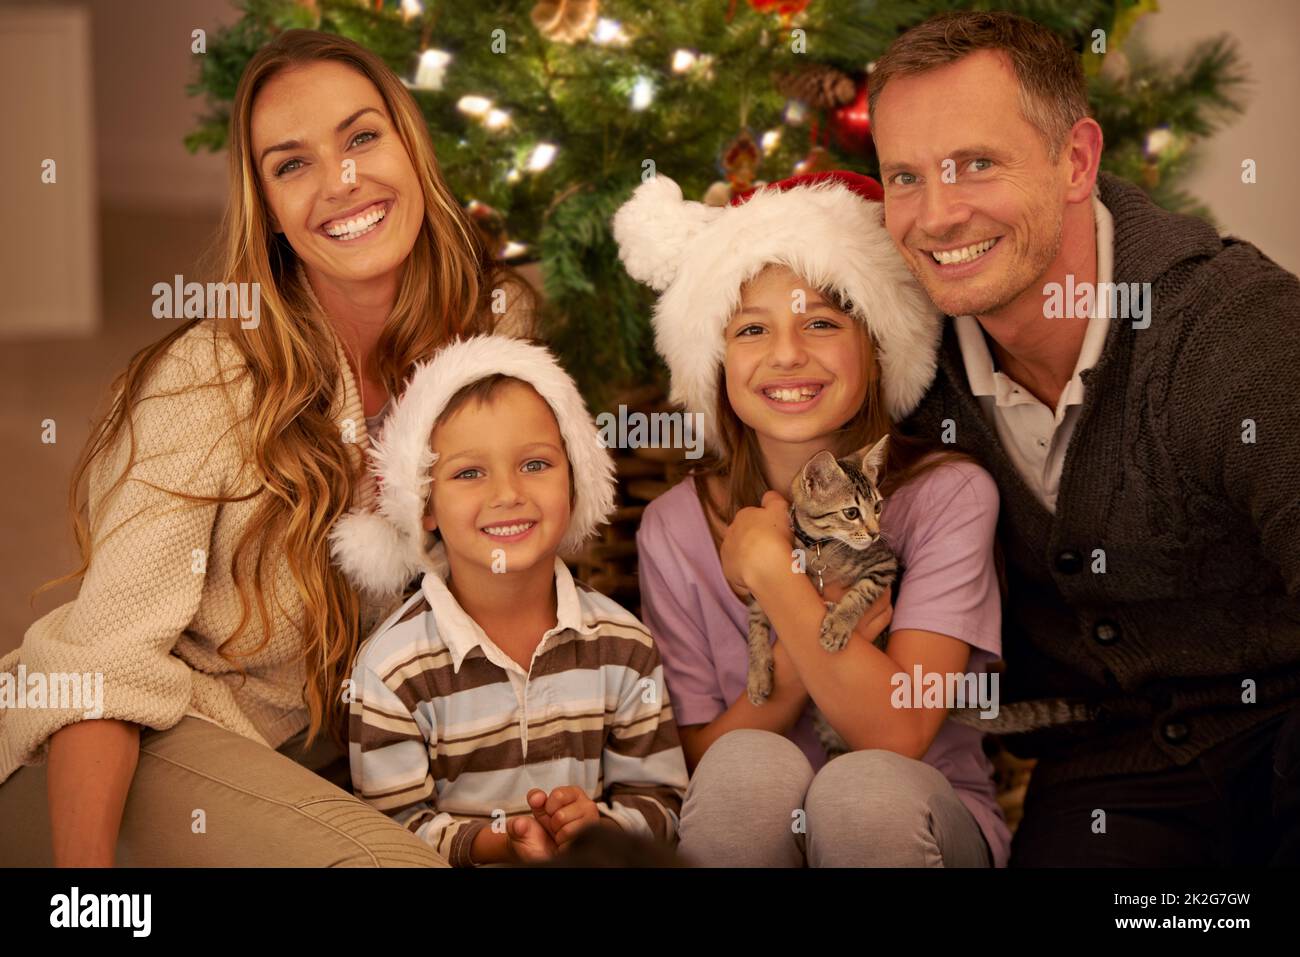 Its a family Christmas. Portrait of a happy young family on Christmas day. Stock Photo